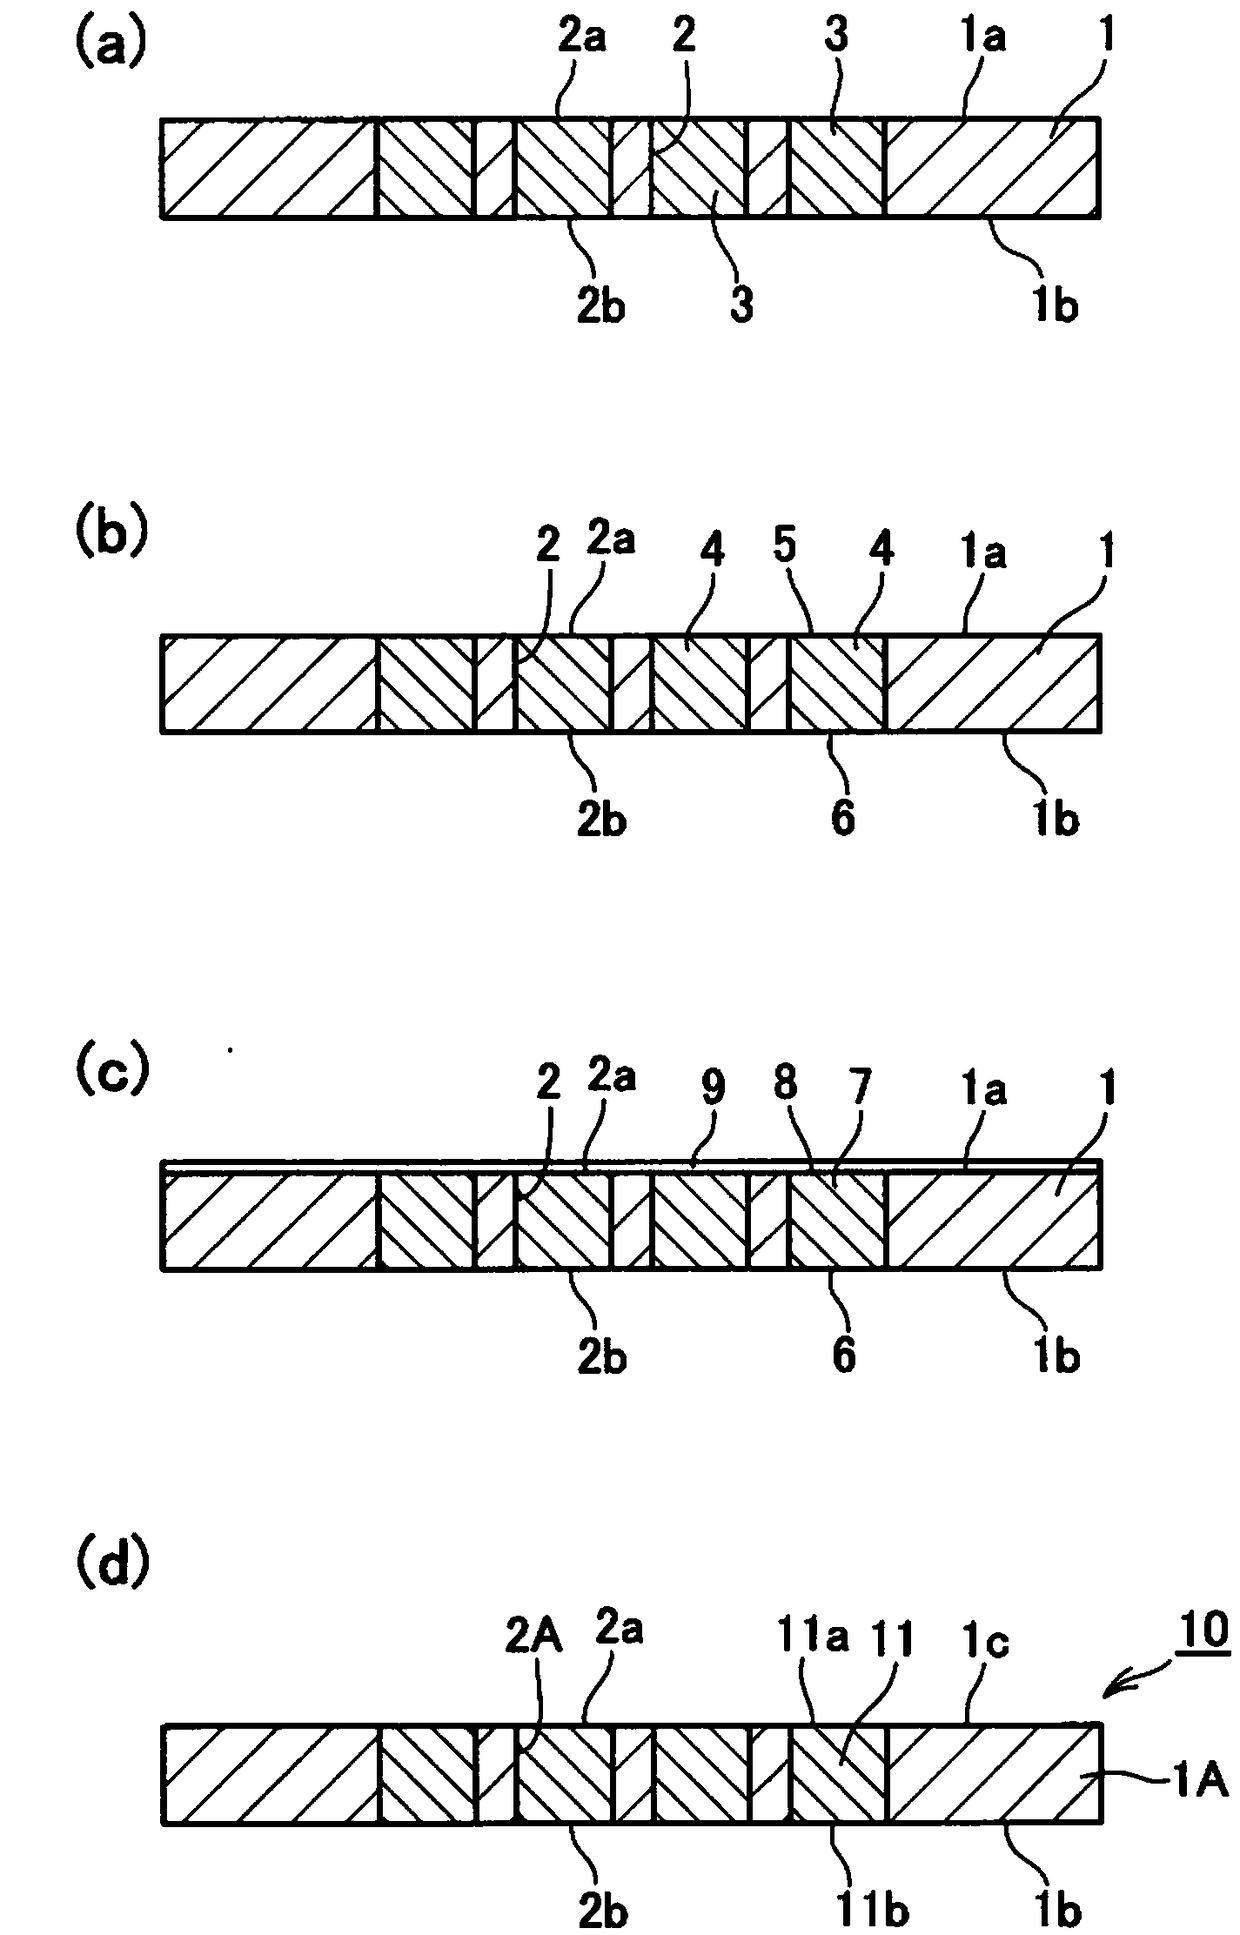 Connection substrate